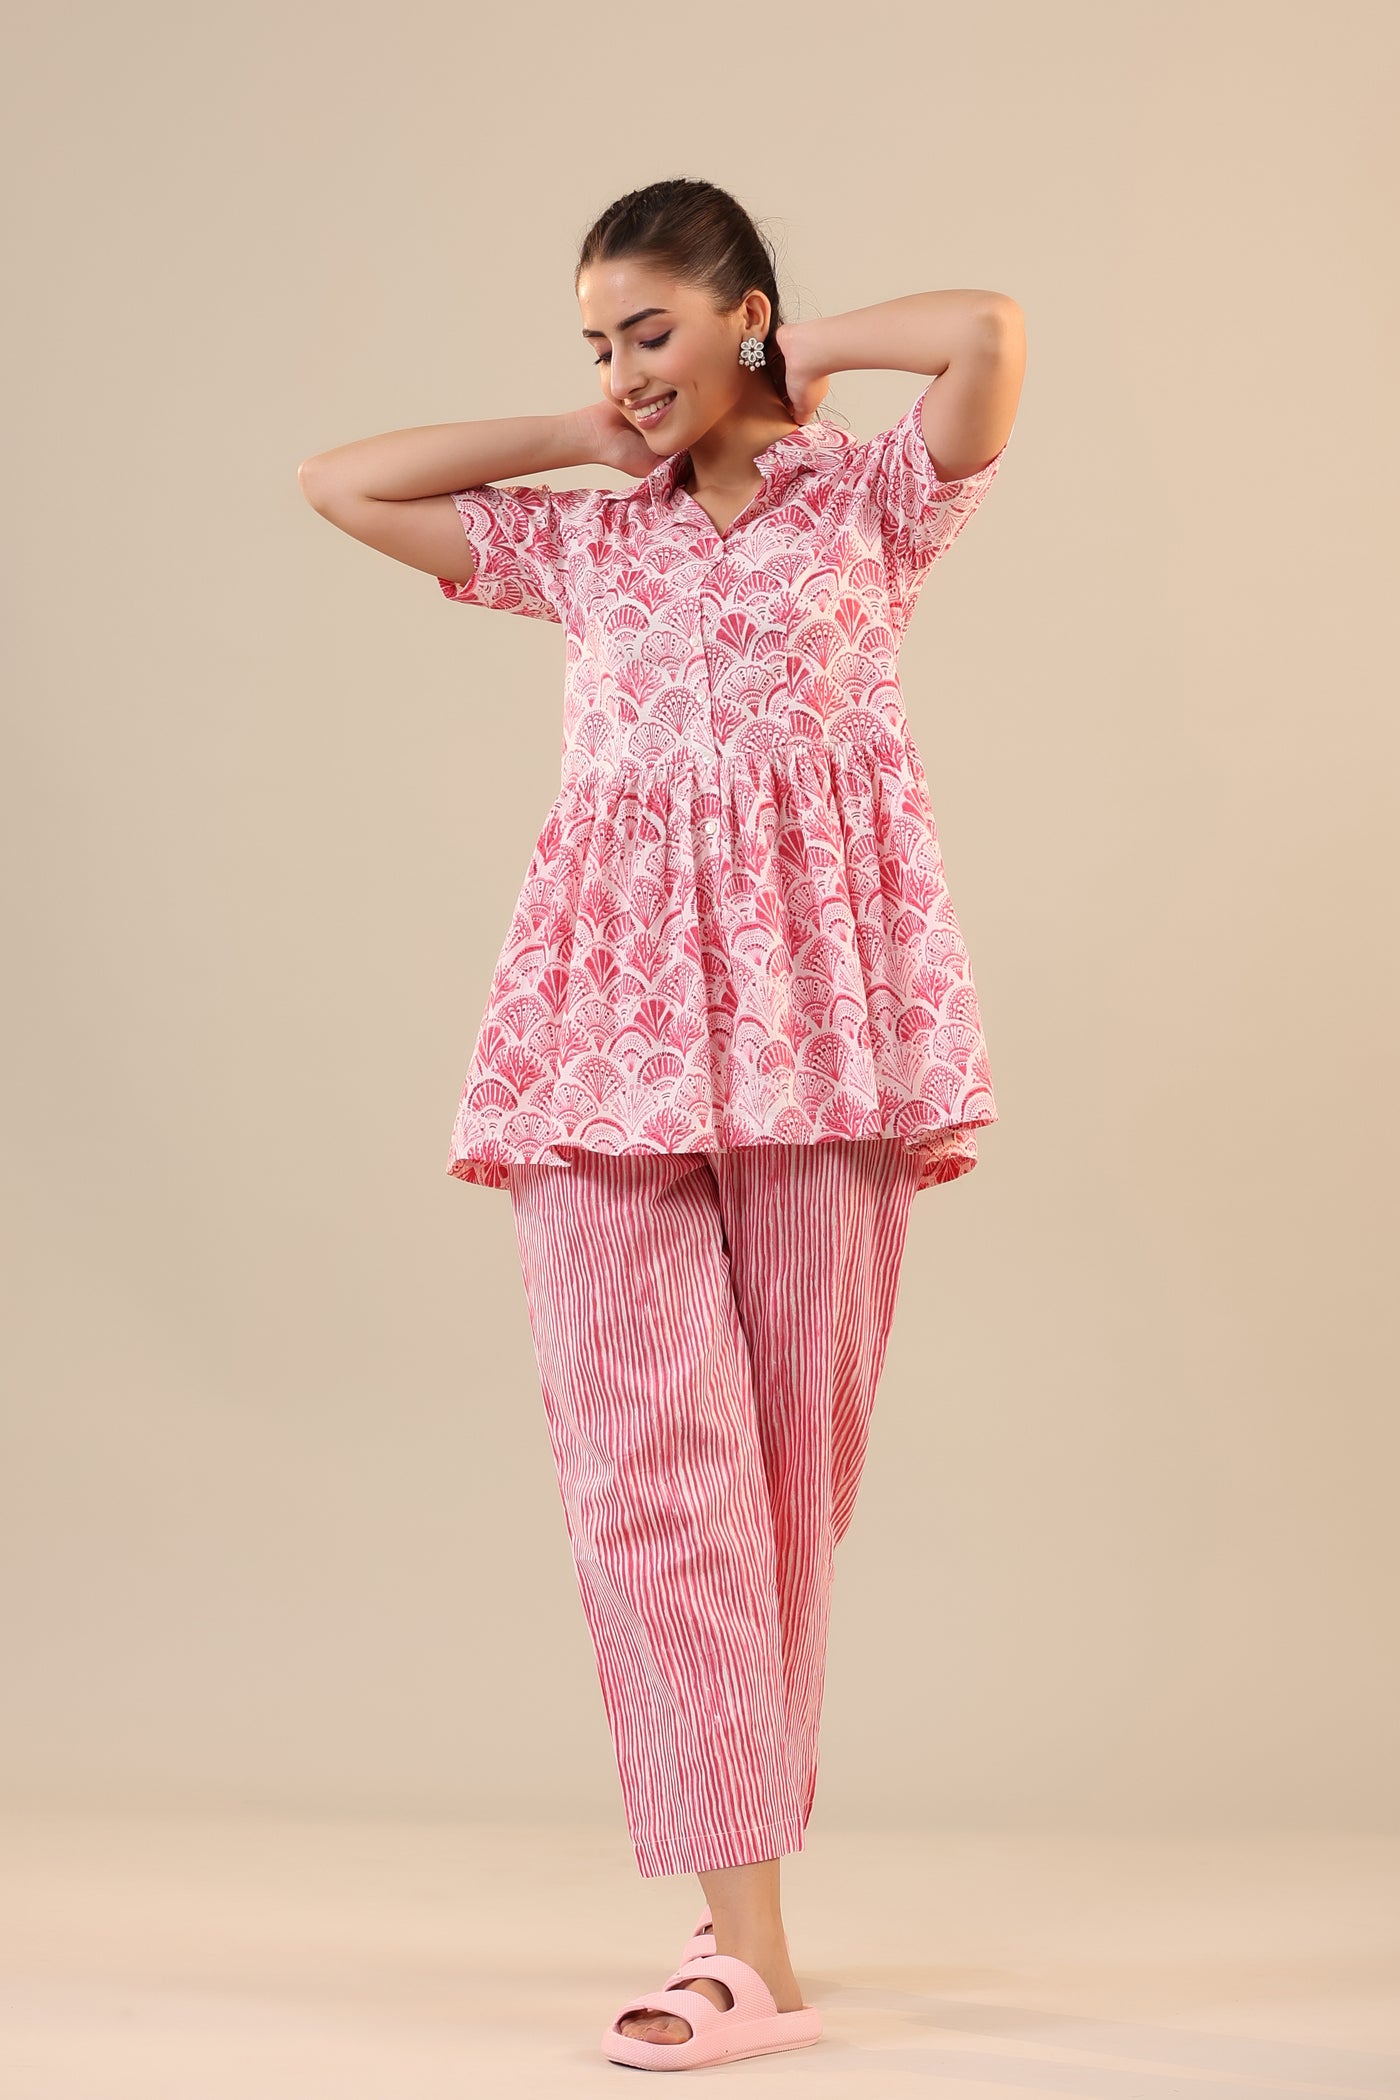 Parallel Stripes with Atelior on Pink Peplum Co ord Set